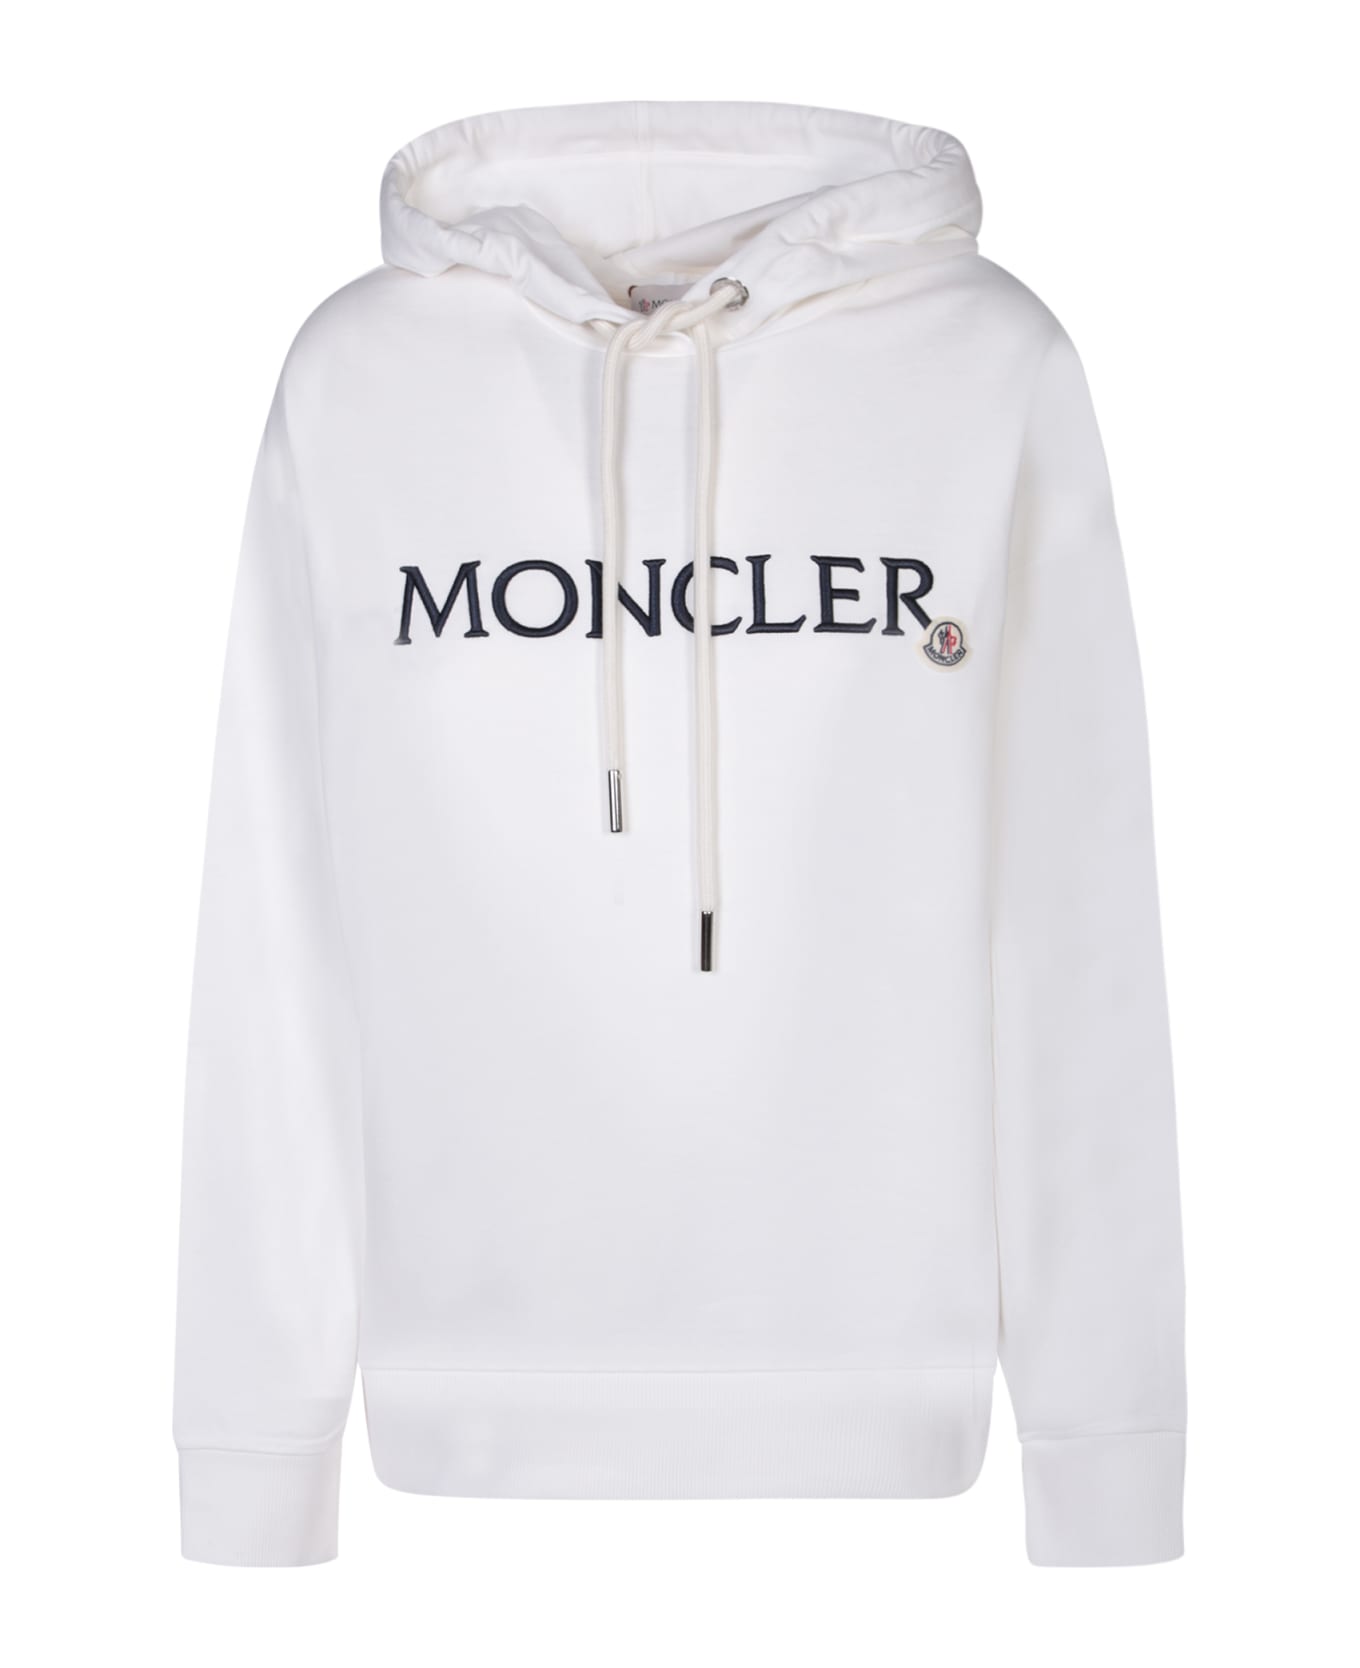 Moncler White Hoodie With Embroidered Lettering Logo - 037